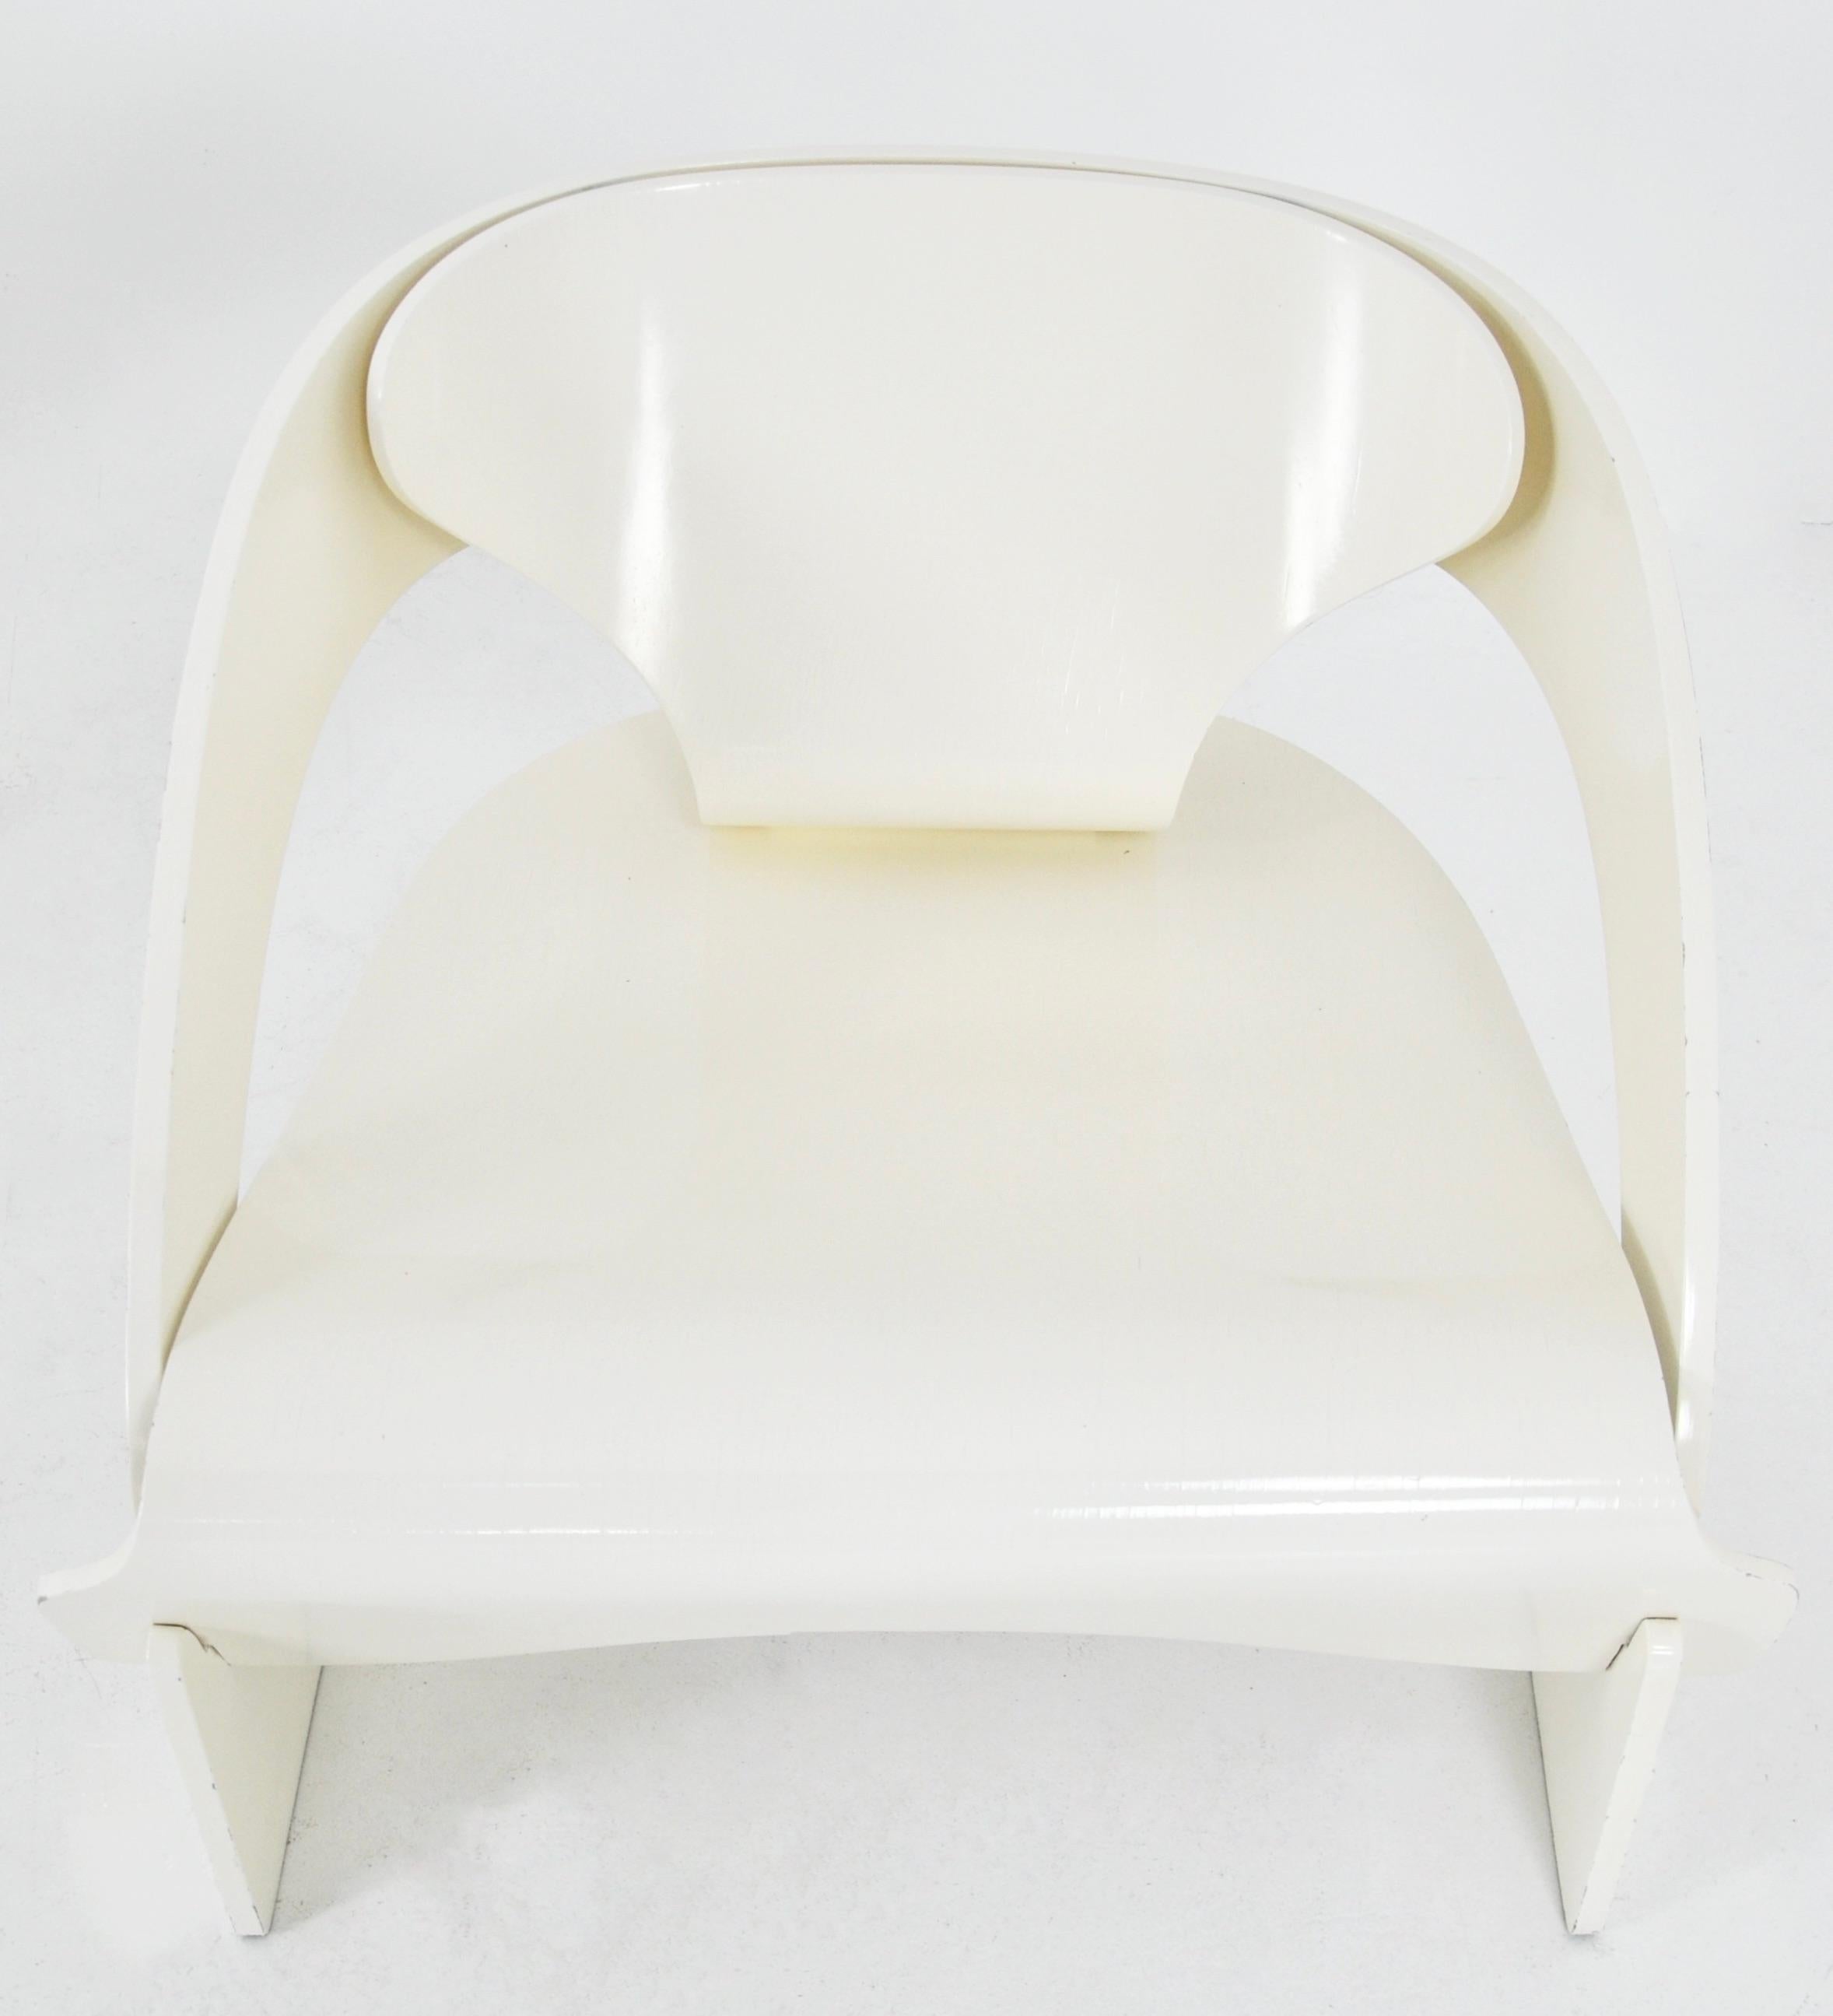 Model 4801 Armchairs by Joe Colombo for Kartell, 1960s, set of 2 For Sale 1